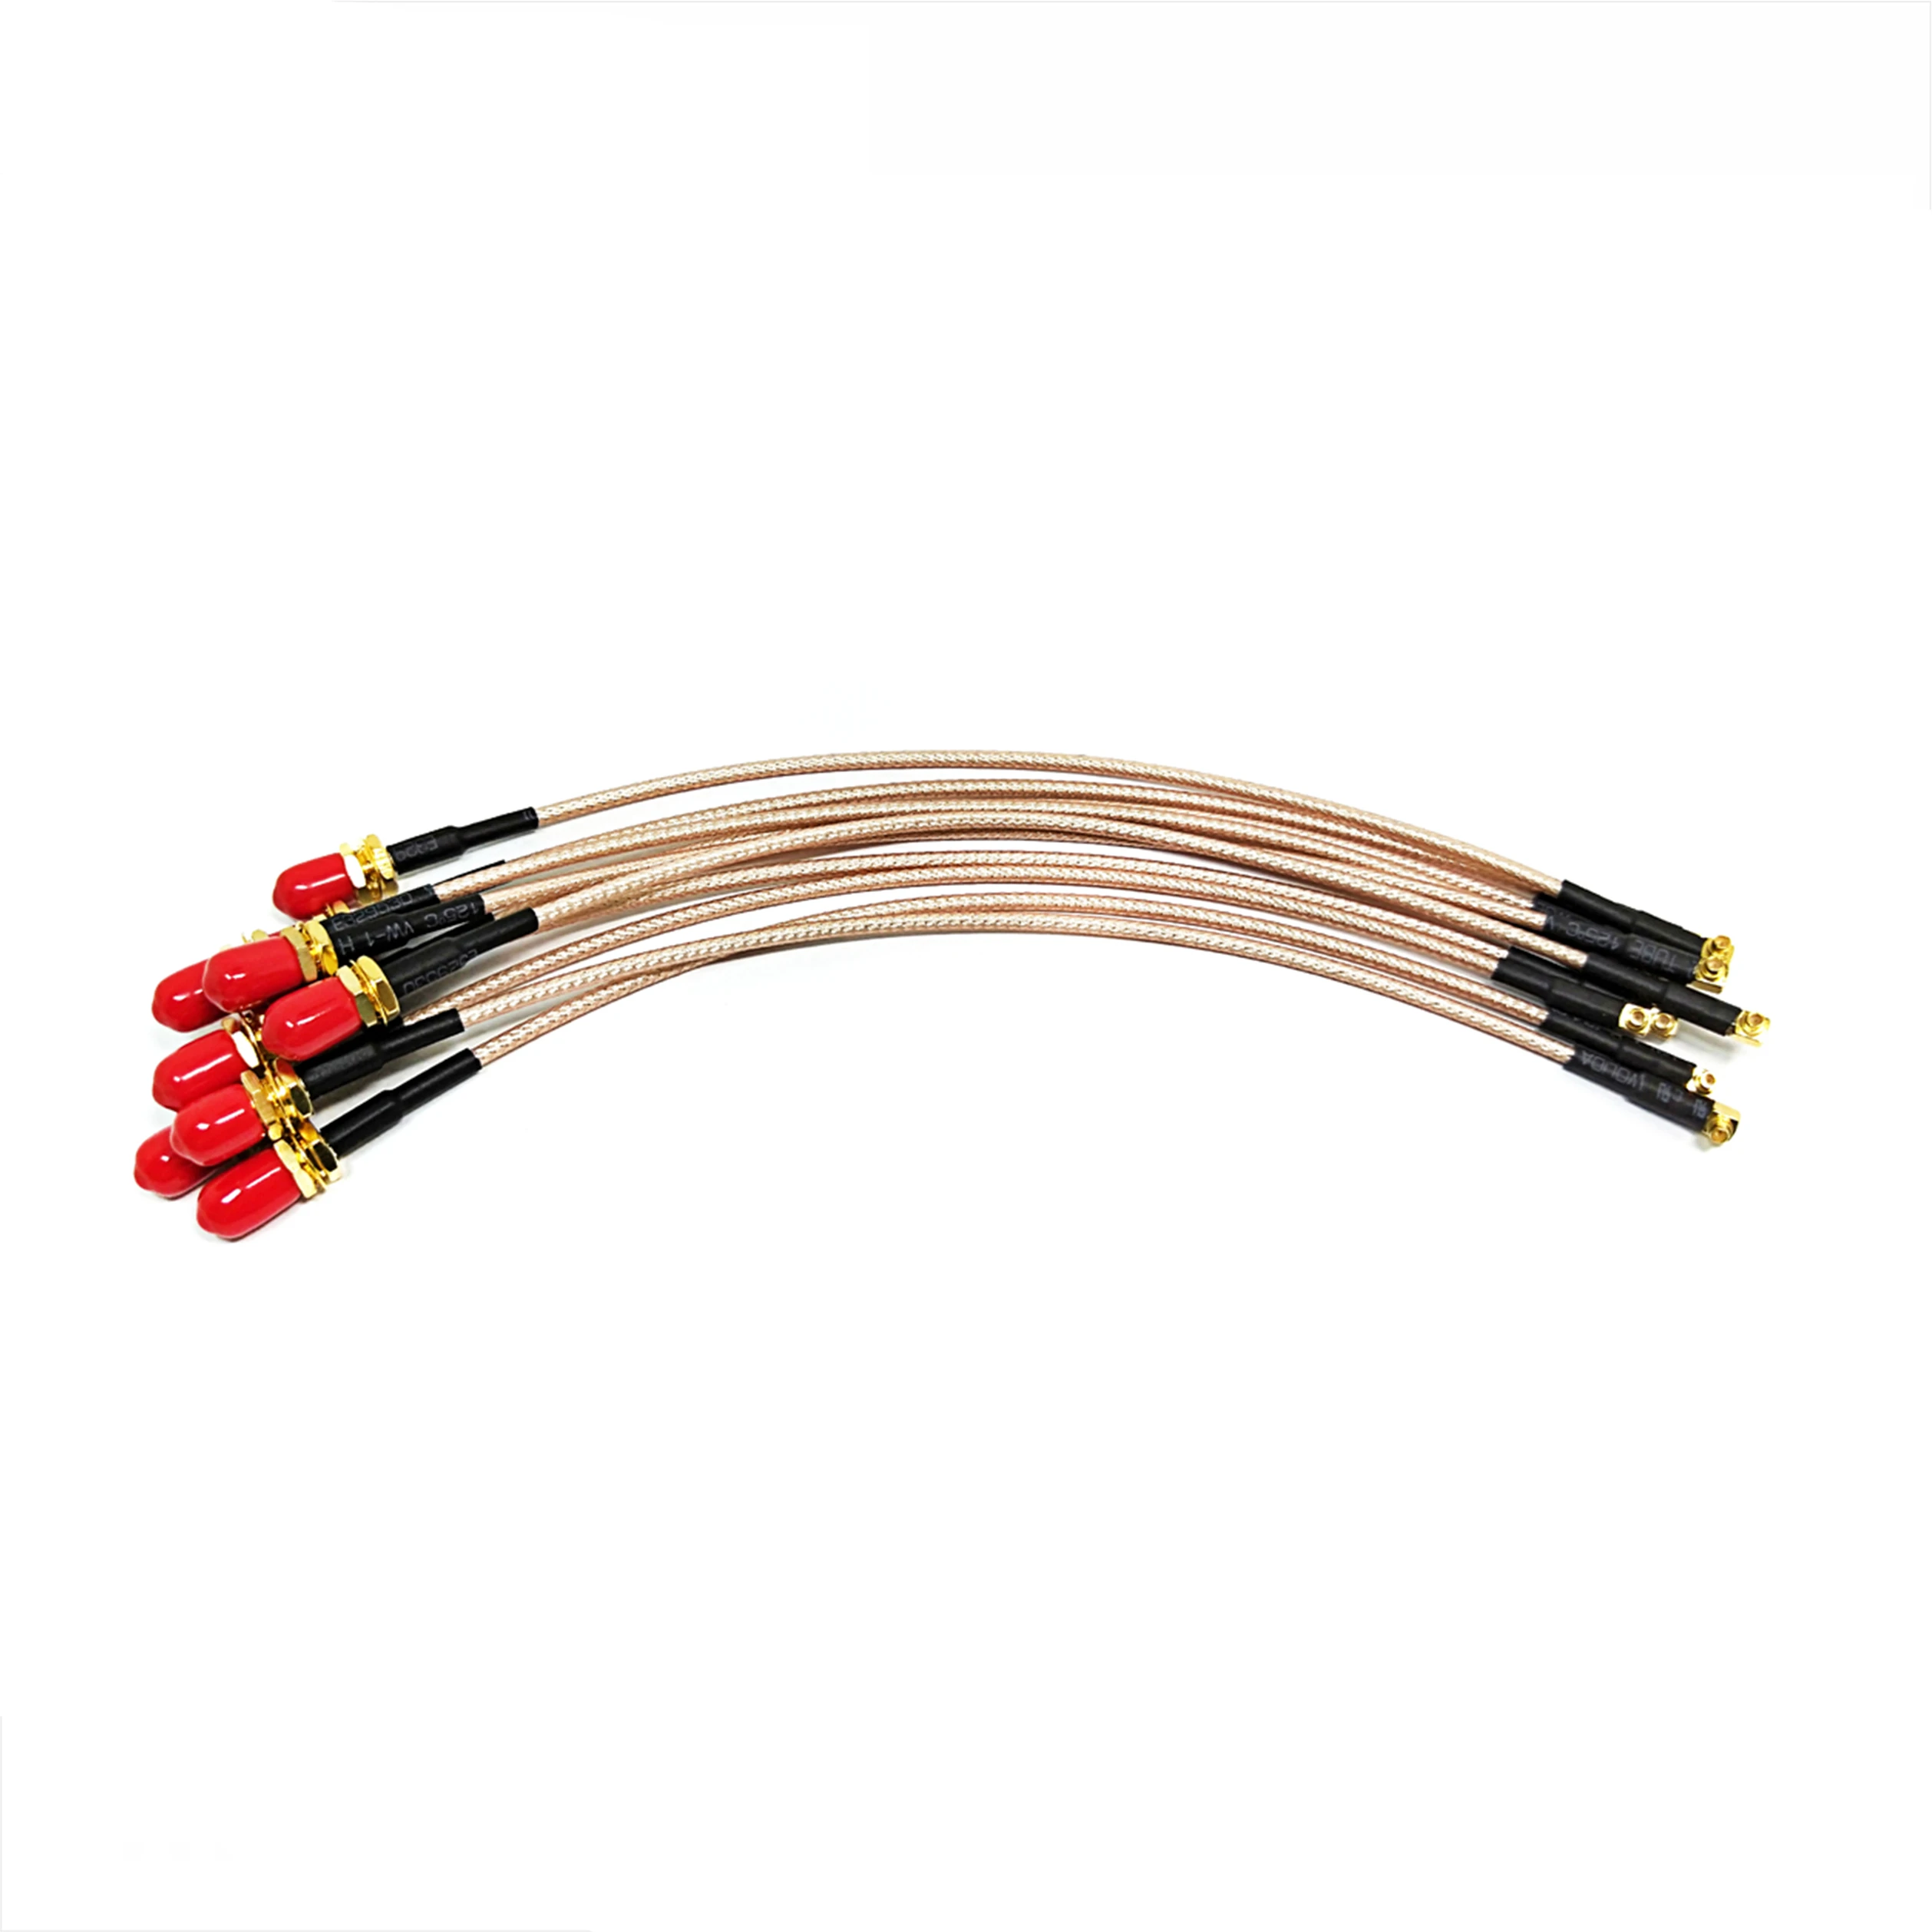 

15cm SMA Female/Jack Bulkhead to MMCX Male Right Angle/Elbow RF Connector RG316 Pigtail Jumper Cable Assembly